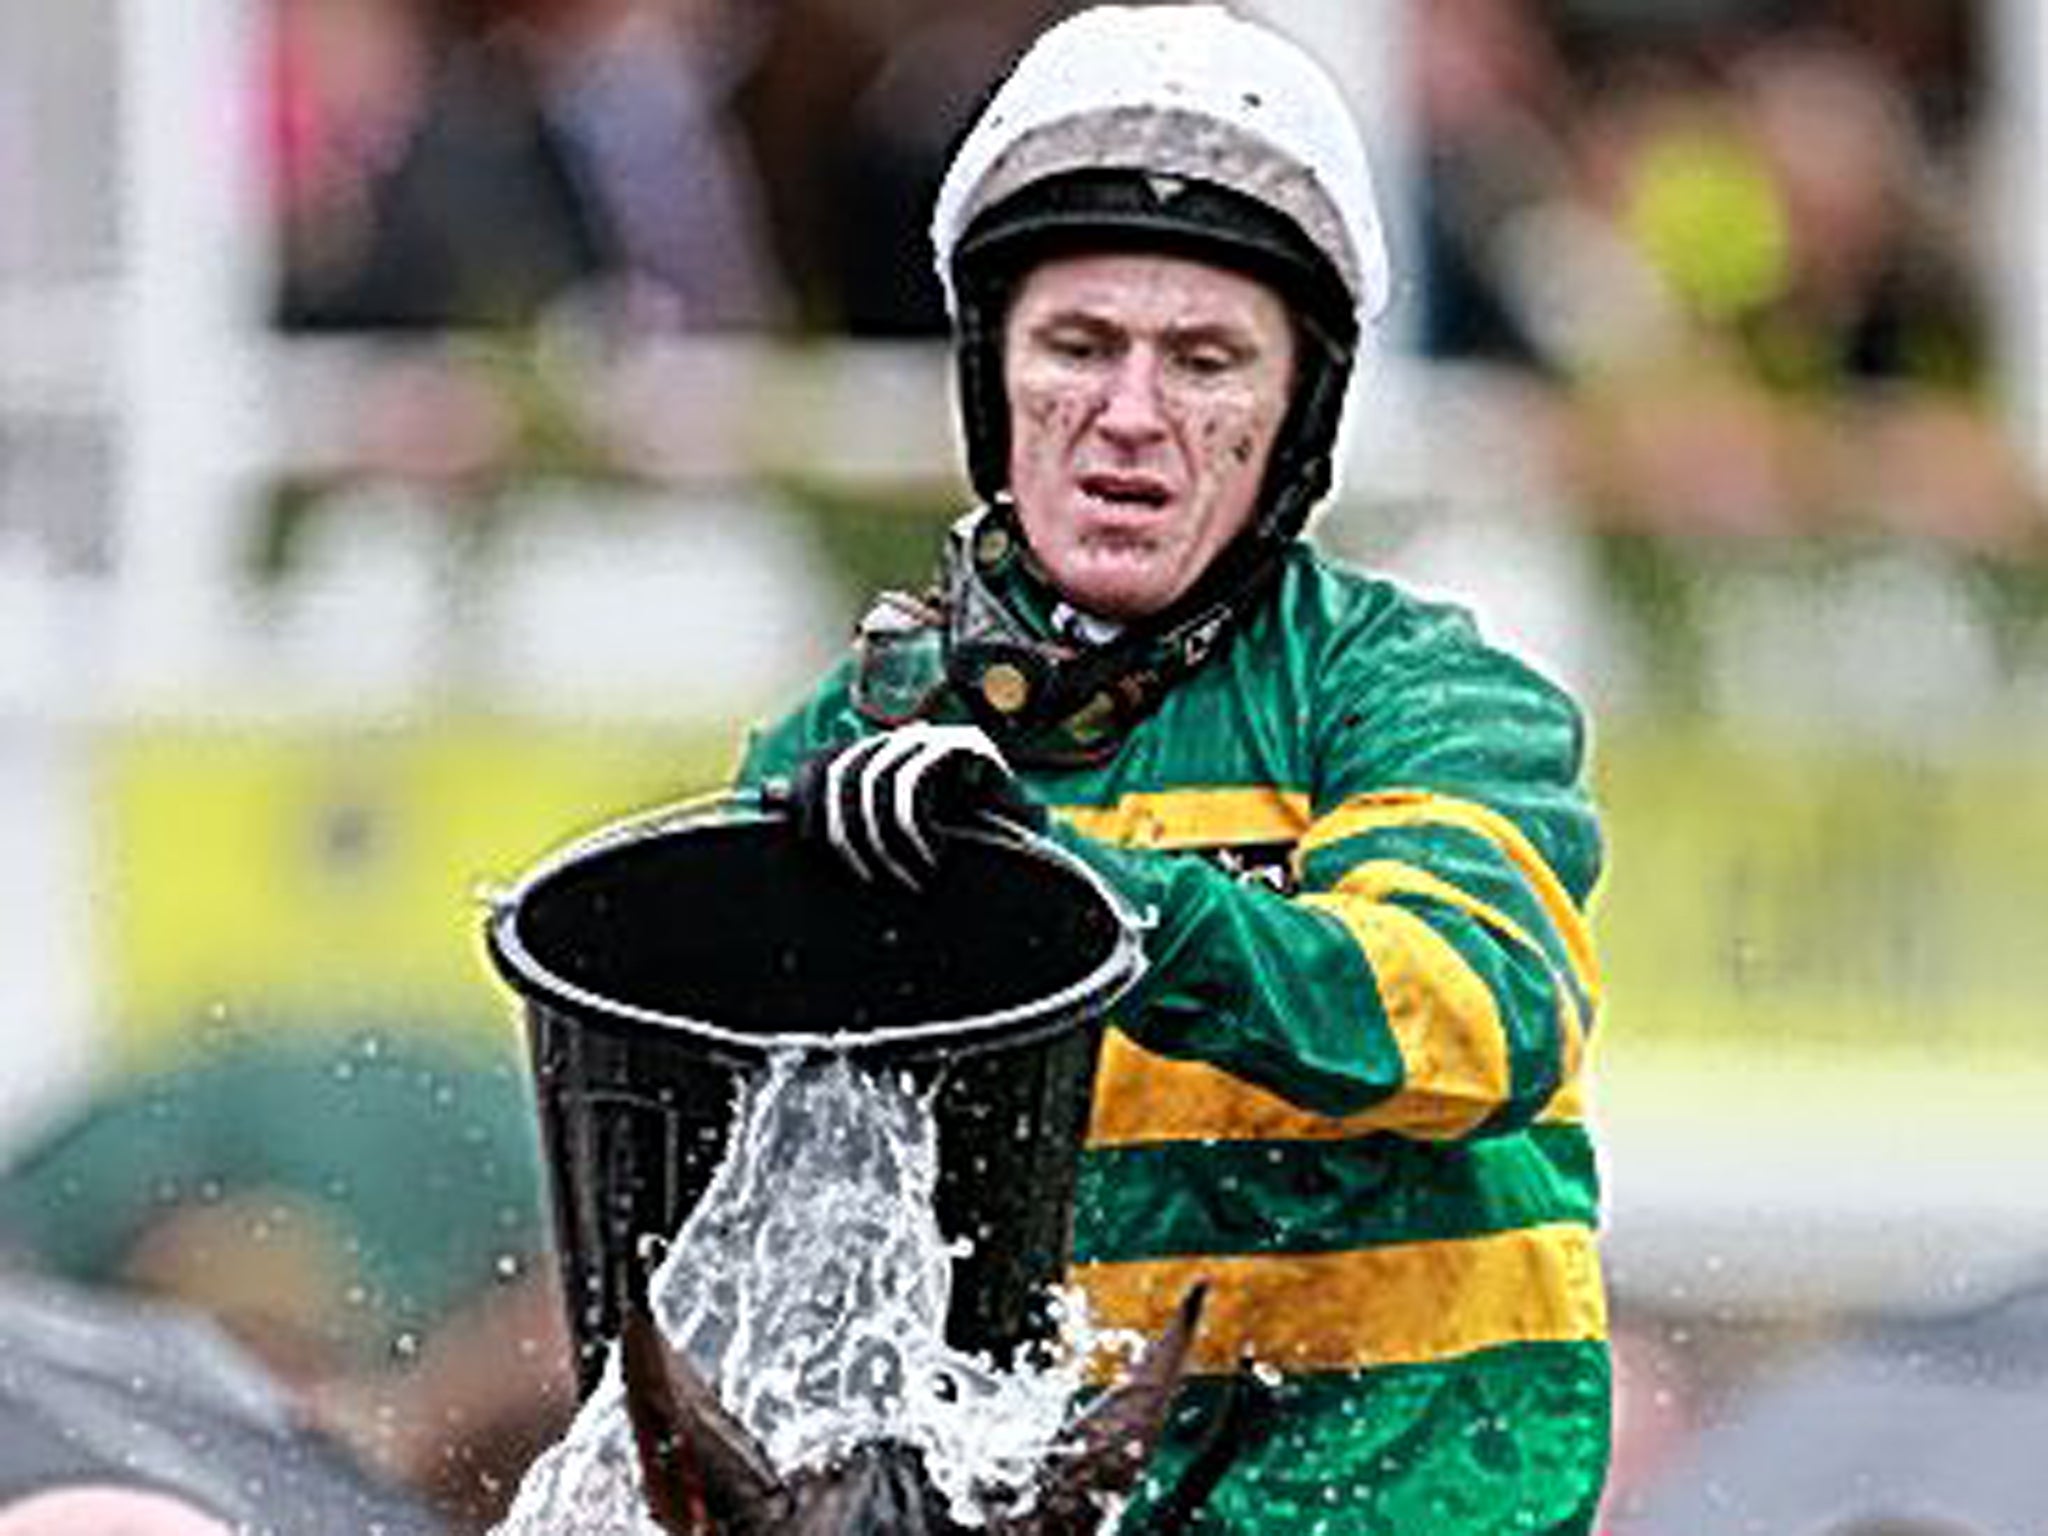 Making a splash: Tony McCoy cools off Double Seven after the race